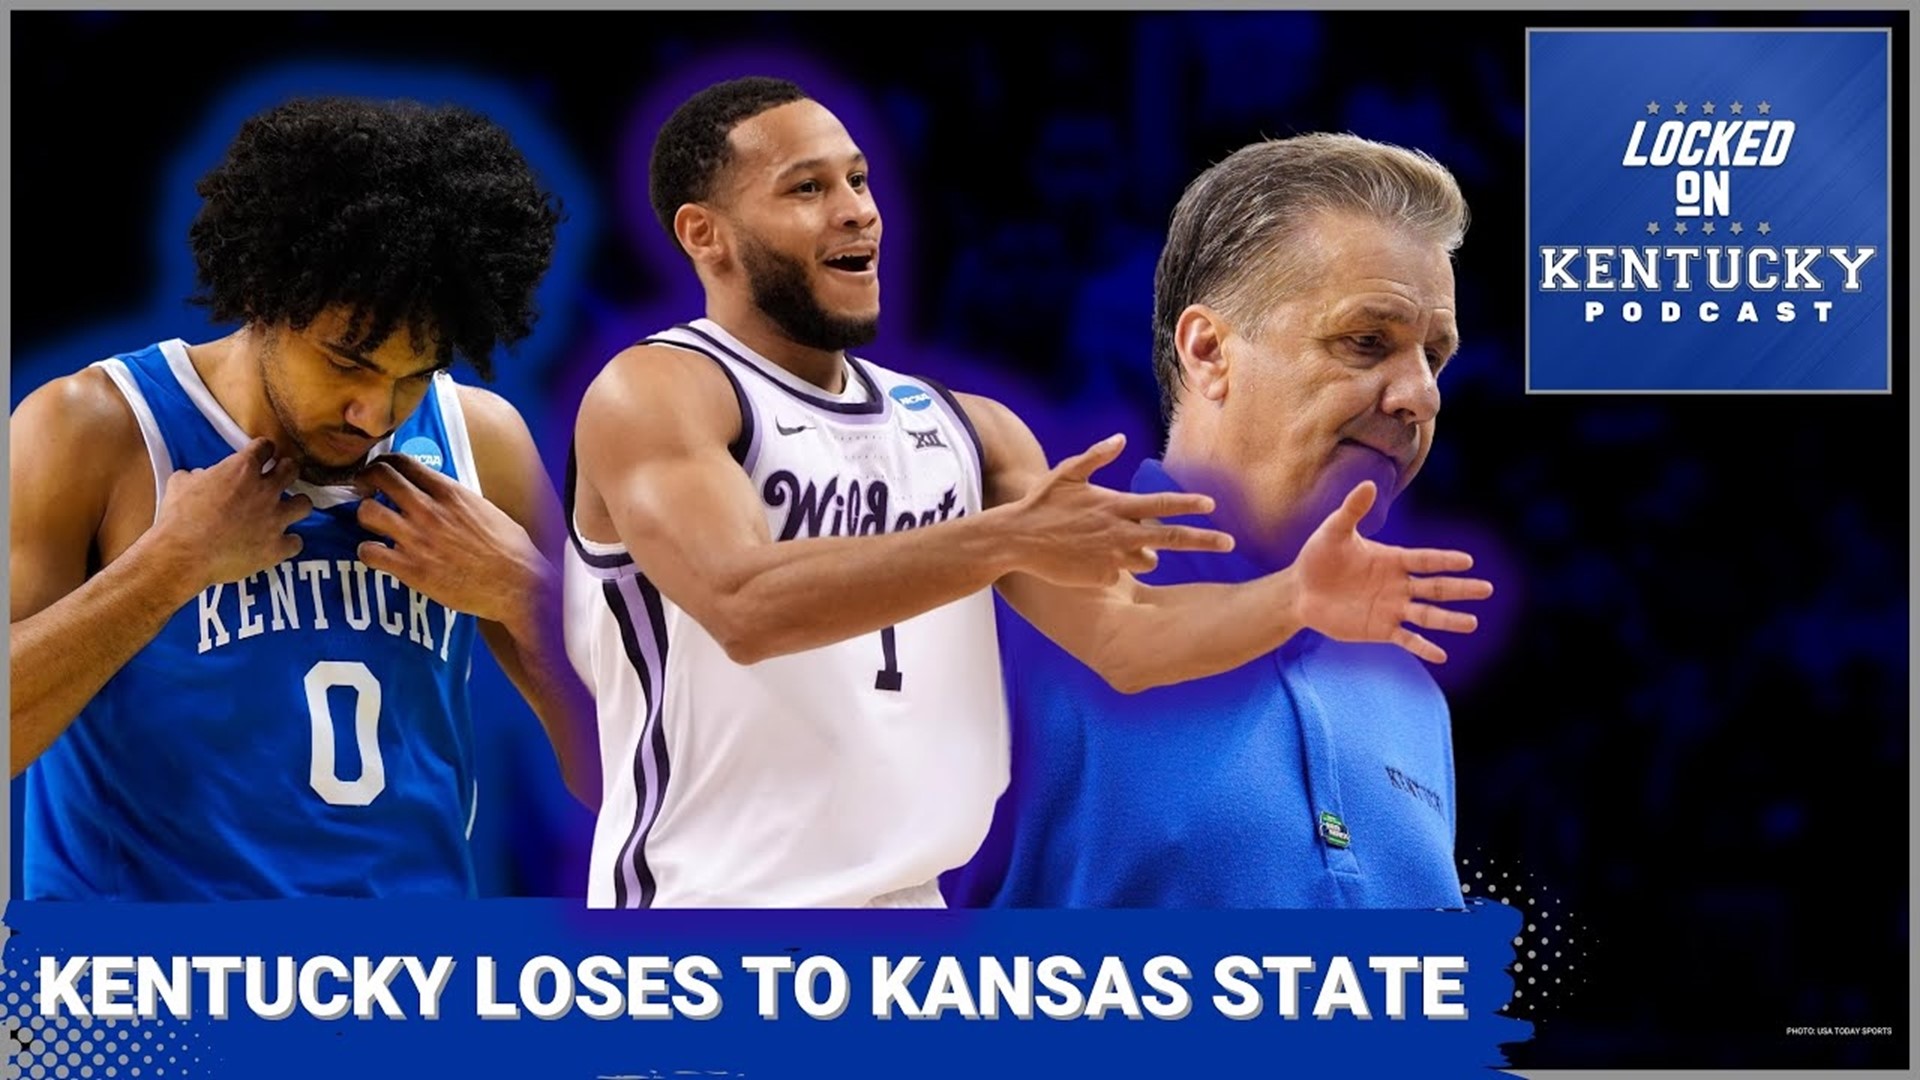 The Kentucky Wildcats' season comes to a close with a loss to Kansas State in the second round of the NCAA tournament.